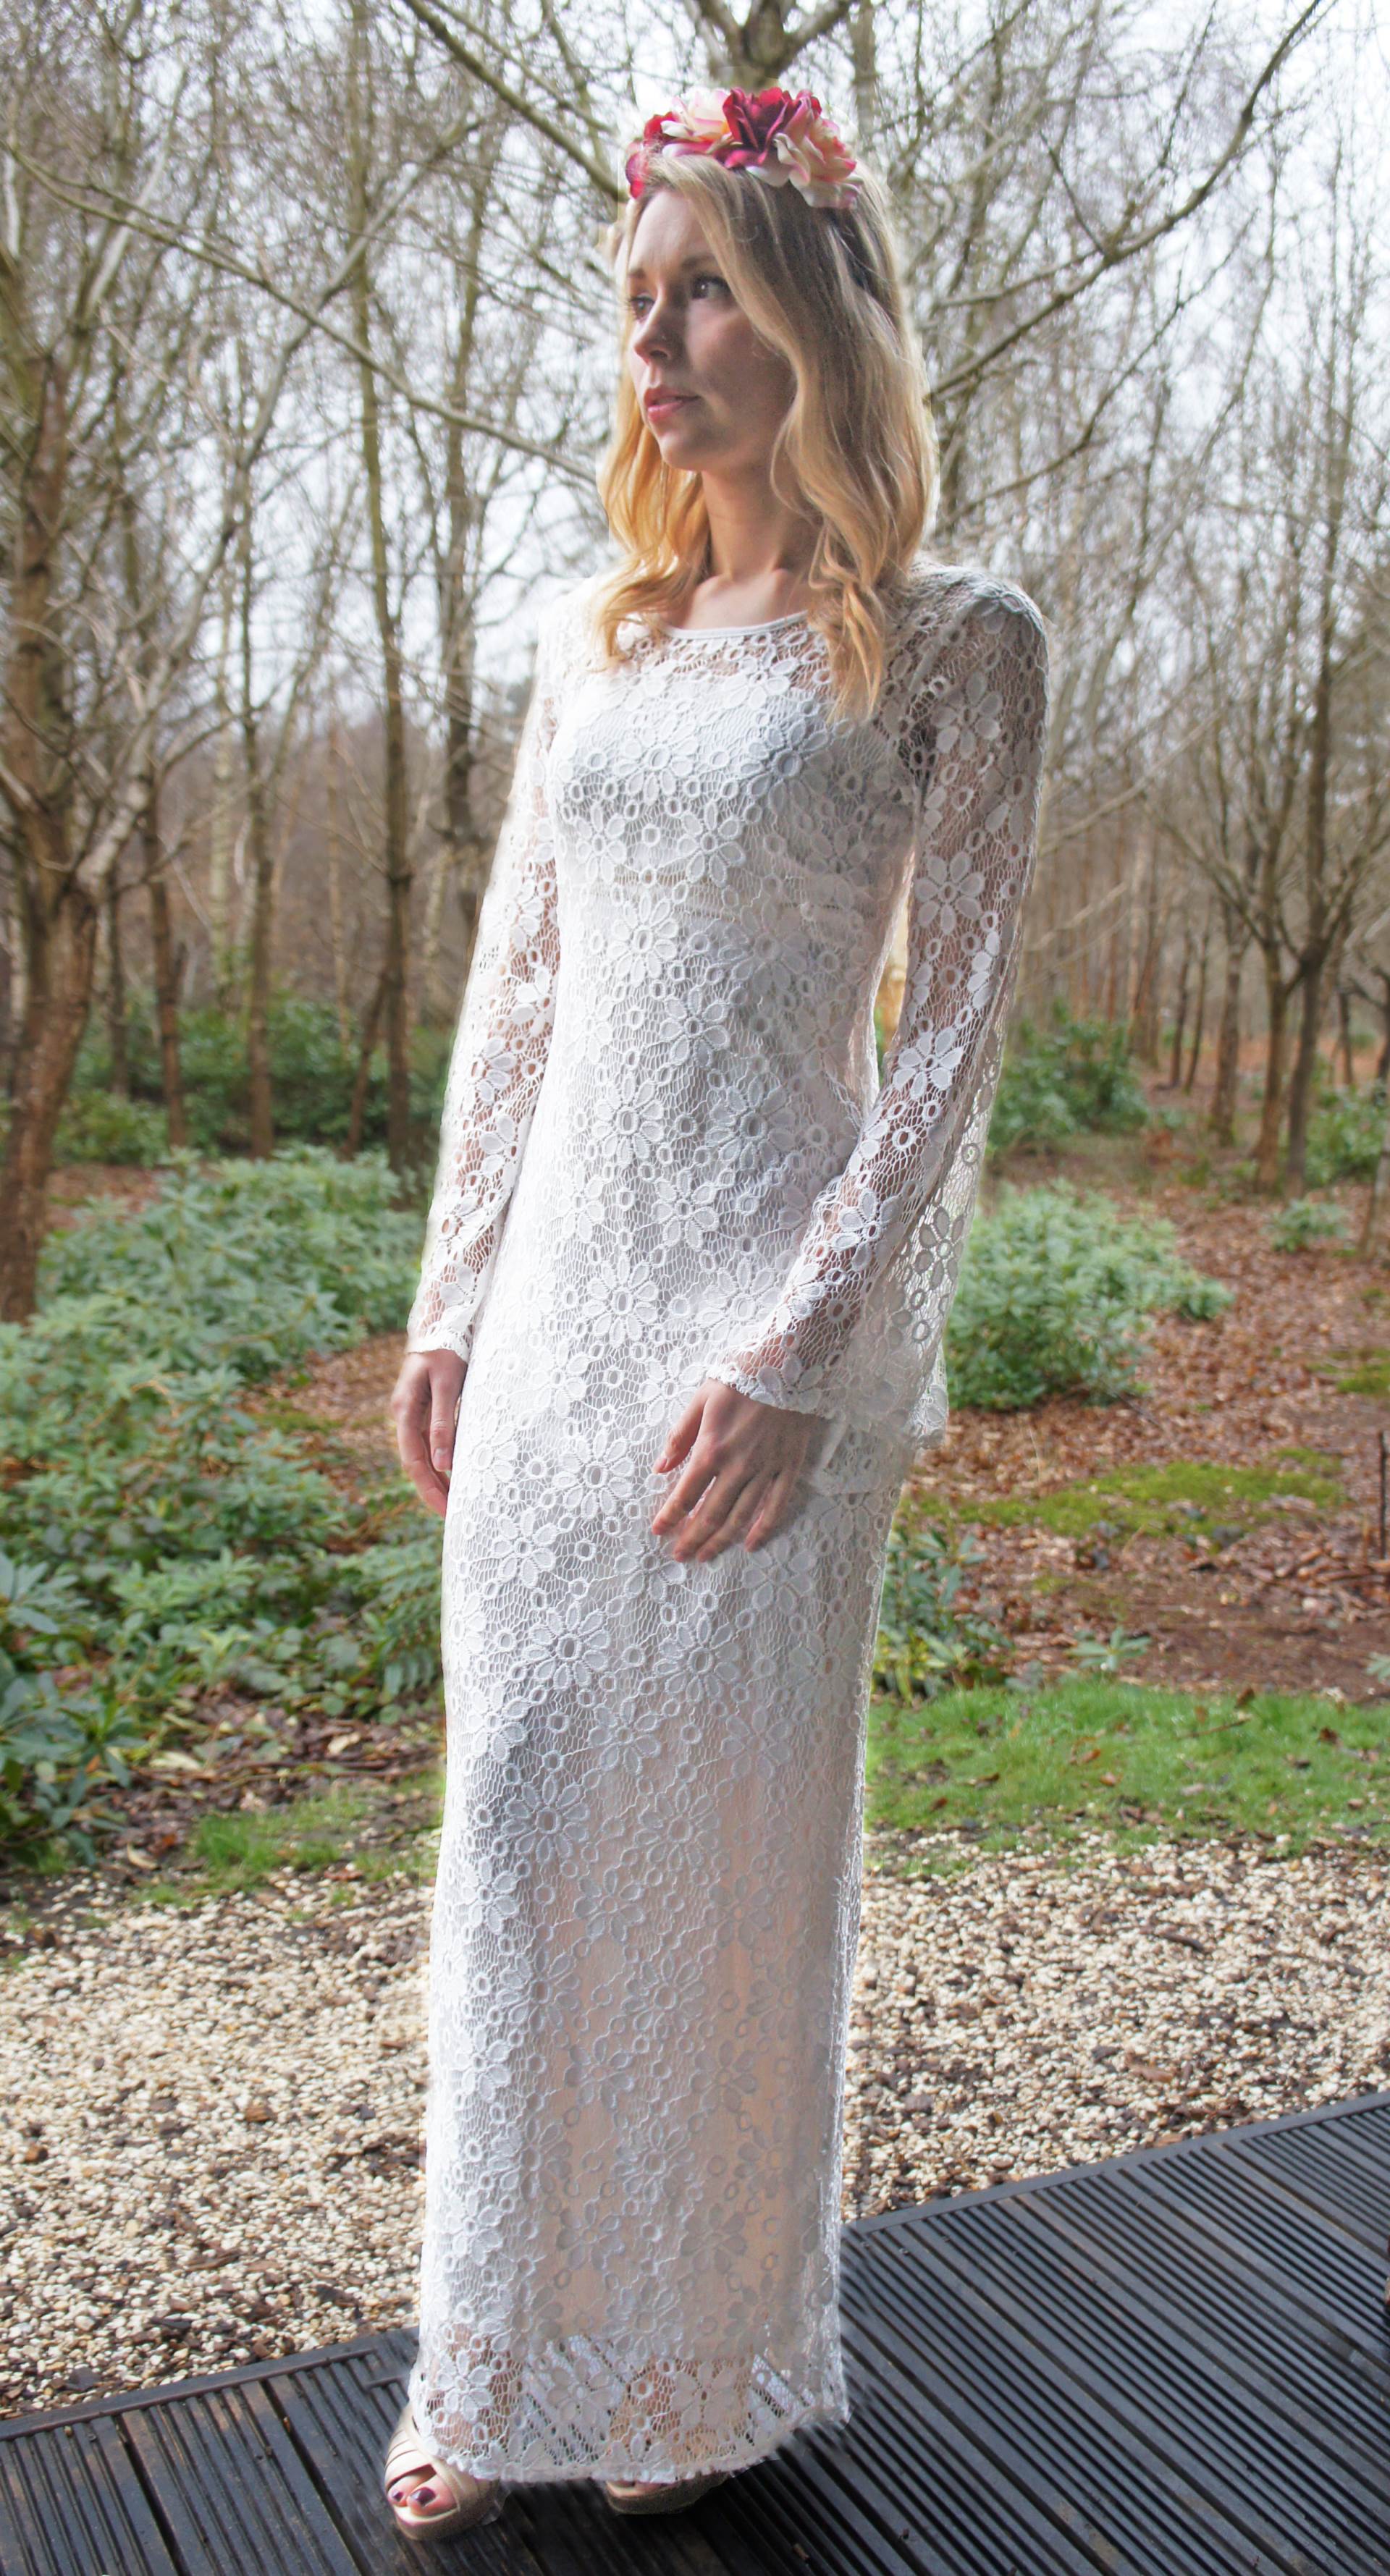 1970s vintage wedding dress from Sincerely Bea Bridal as featured on The National Vintage Wedding Fair blog